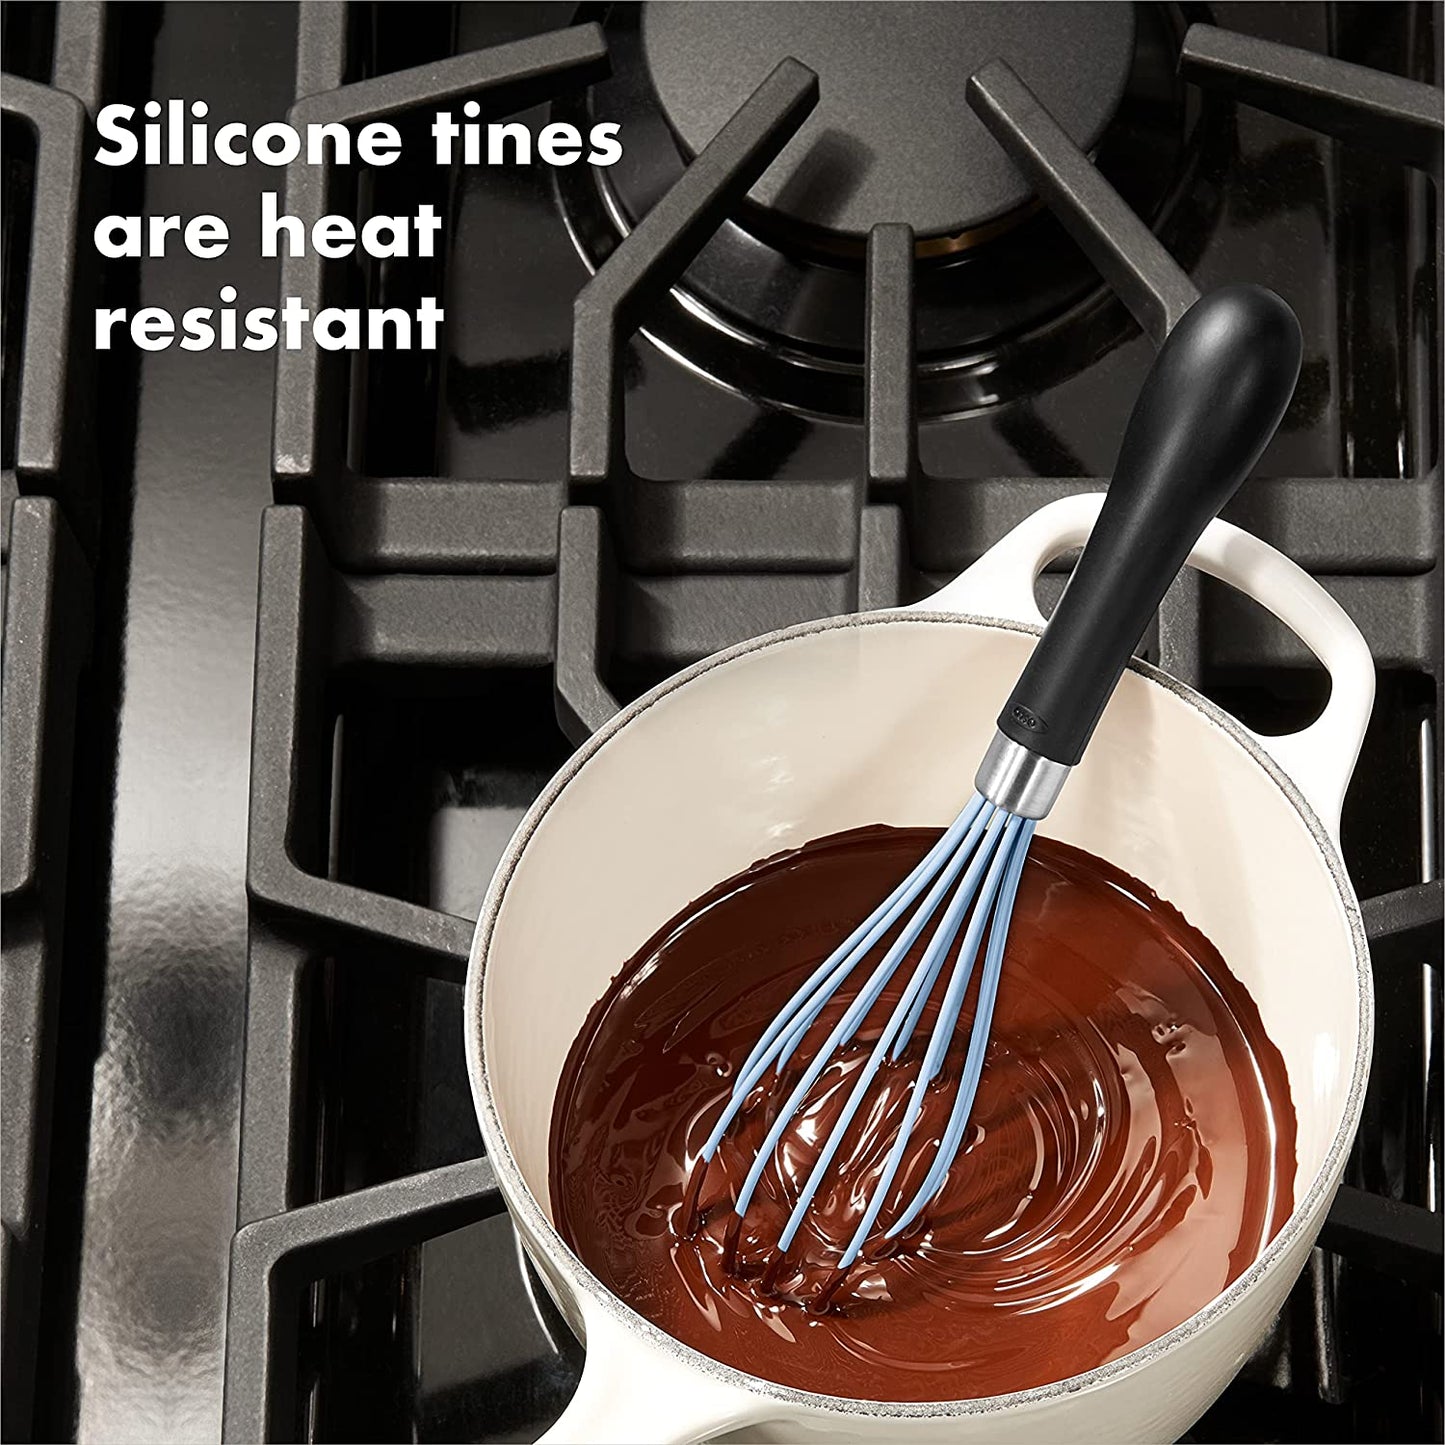 whisk in pot filled with melted chocolate on stove with text "silicone tines are heat resistant".